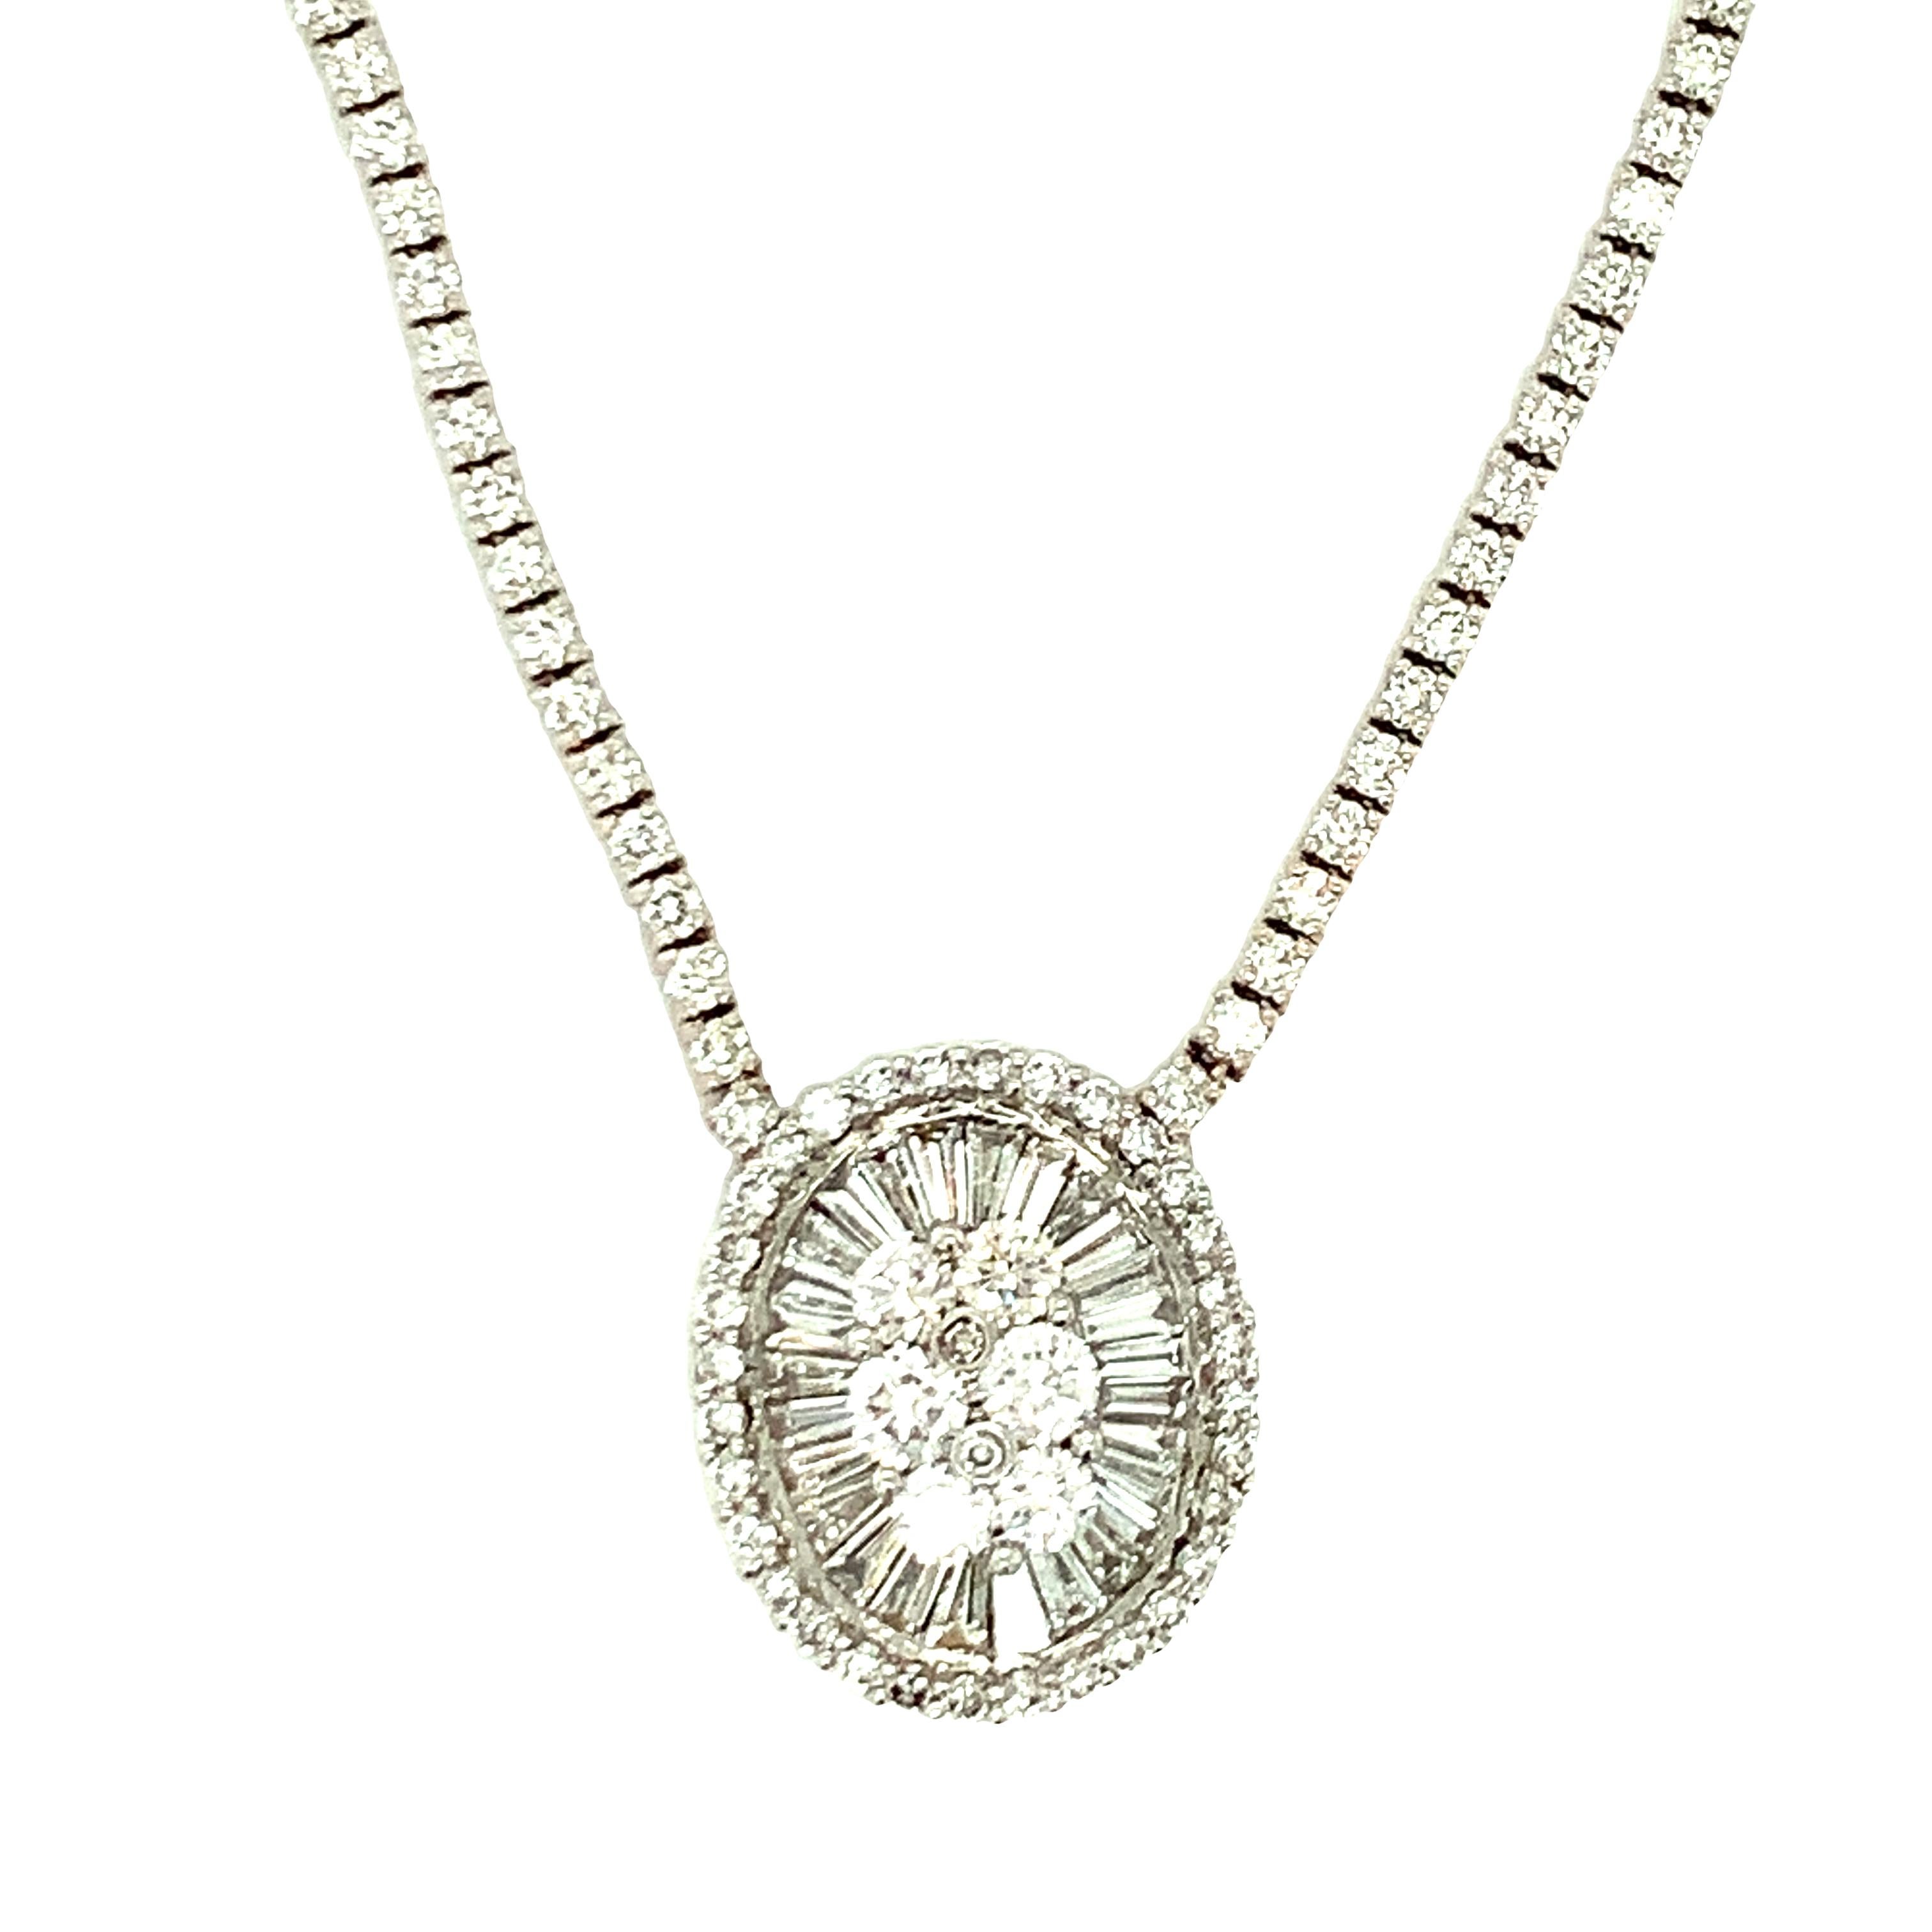 One 14K white gold diamond pendant / necklace featuring 272 baguette and round brilliant cut diamonds totaling 3.72 ct. with H-I color and SI-1 clarity. Riviera style link necklace with oval shaped center pendant portion design.  

Sparkly, showy,